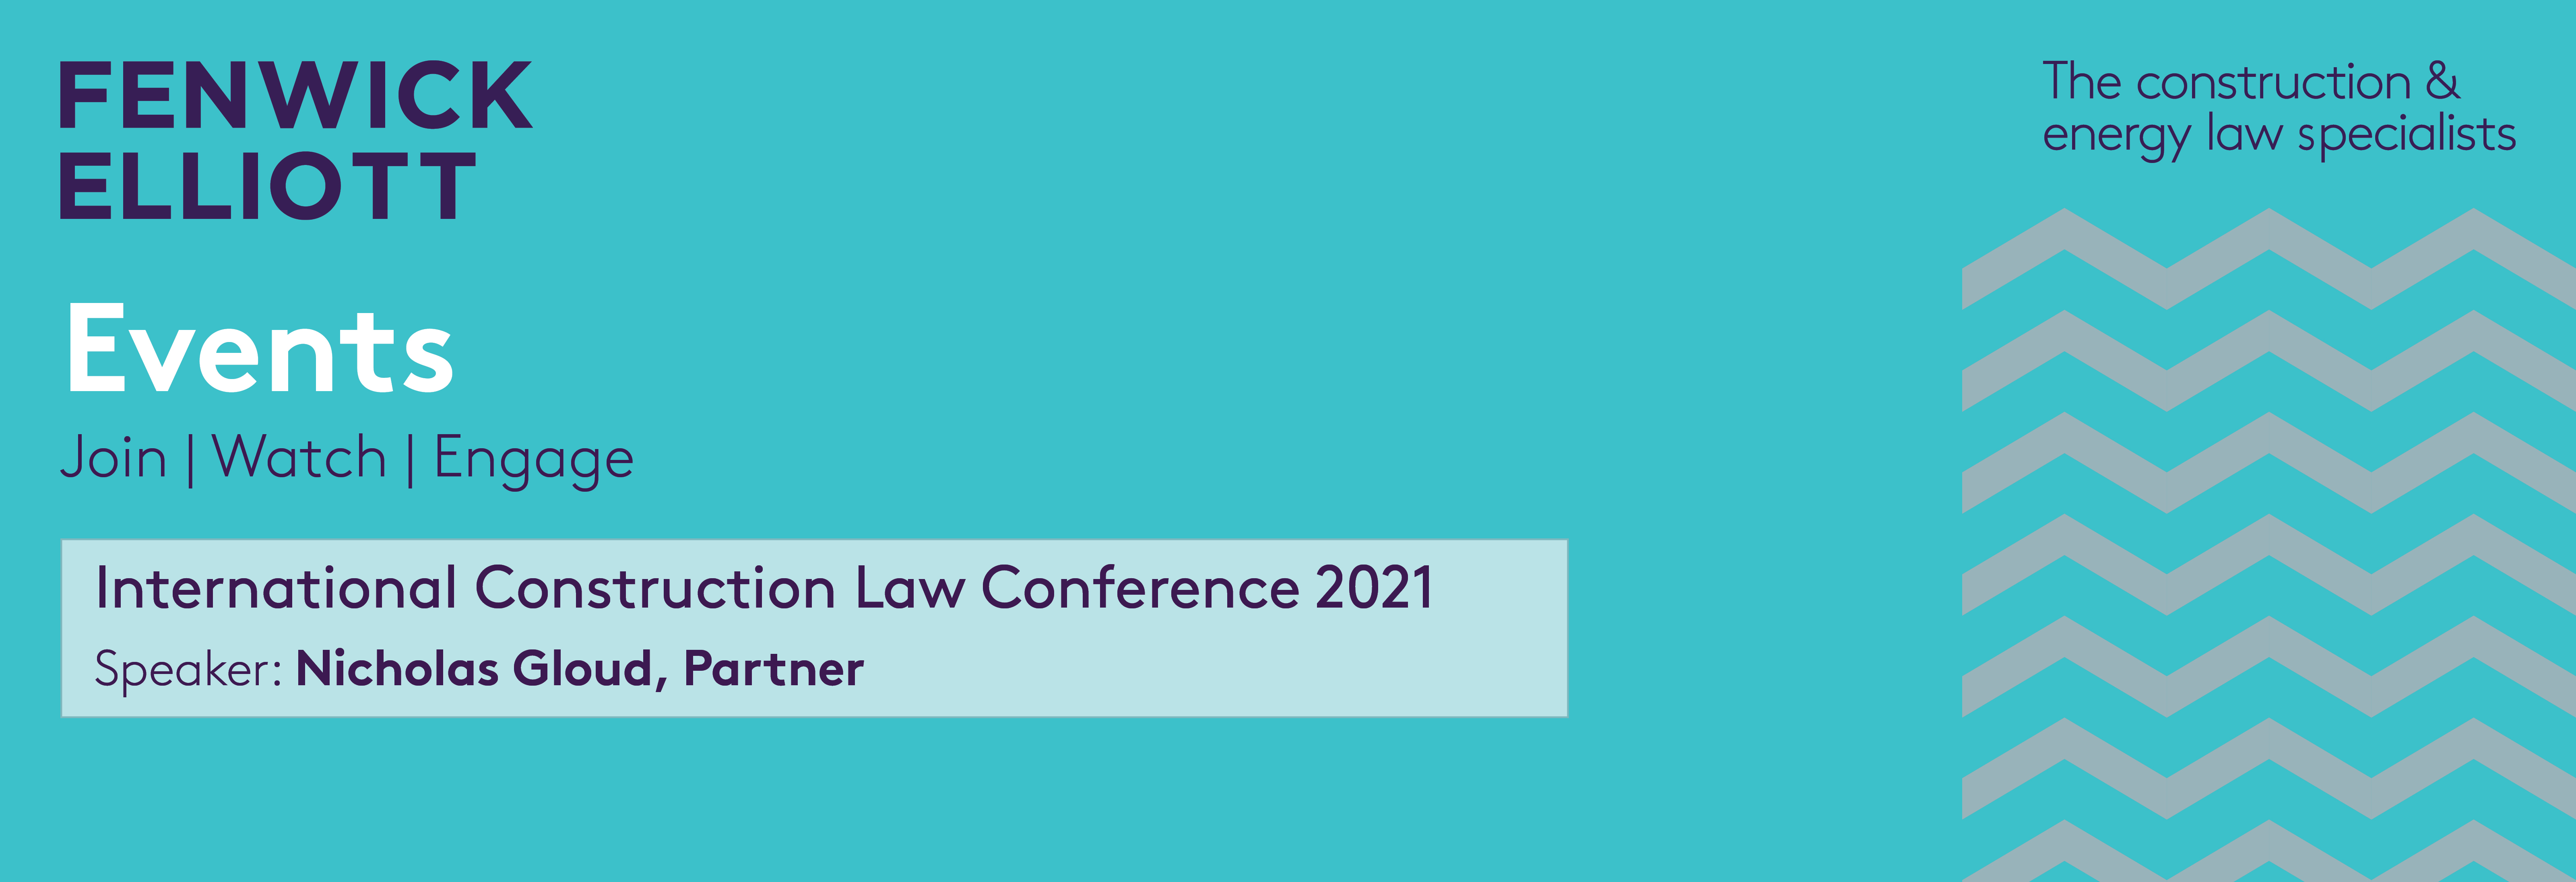 International Construction Law Conference 2021 banner